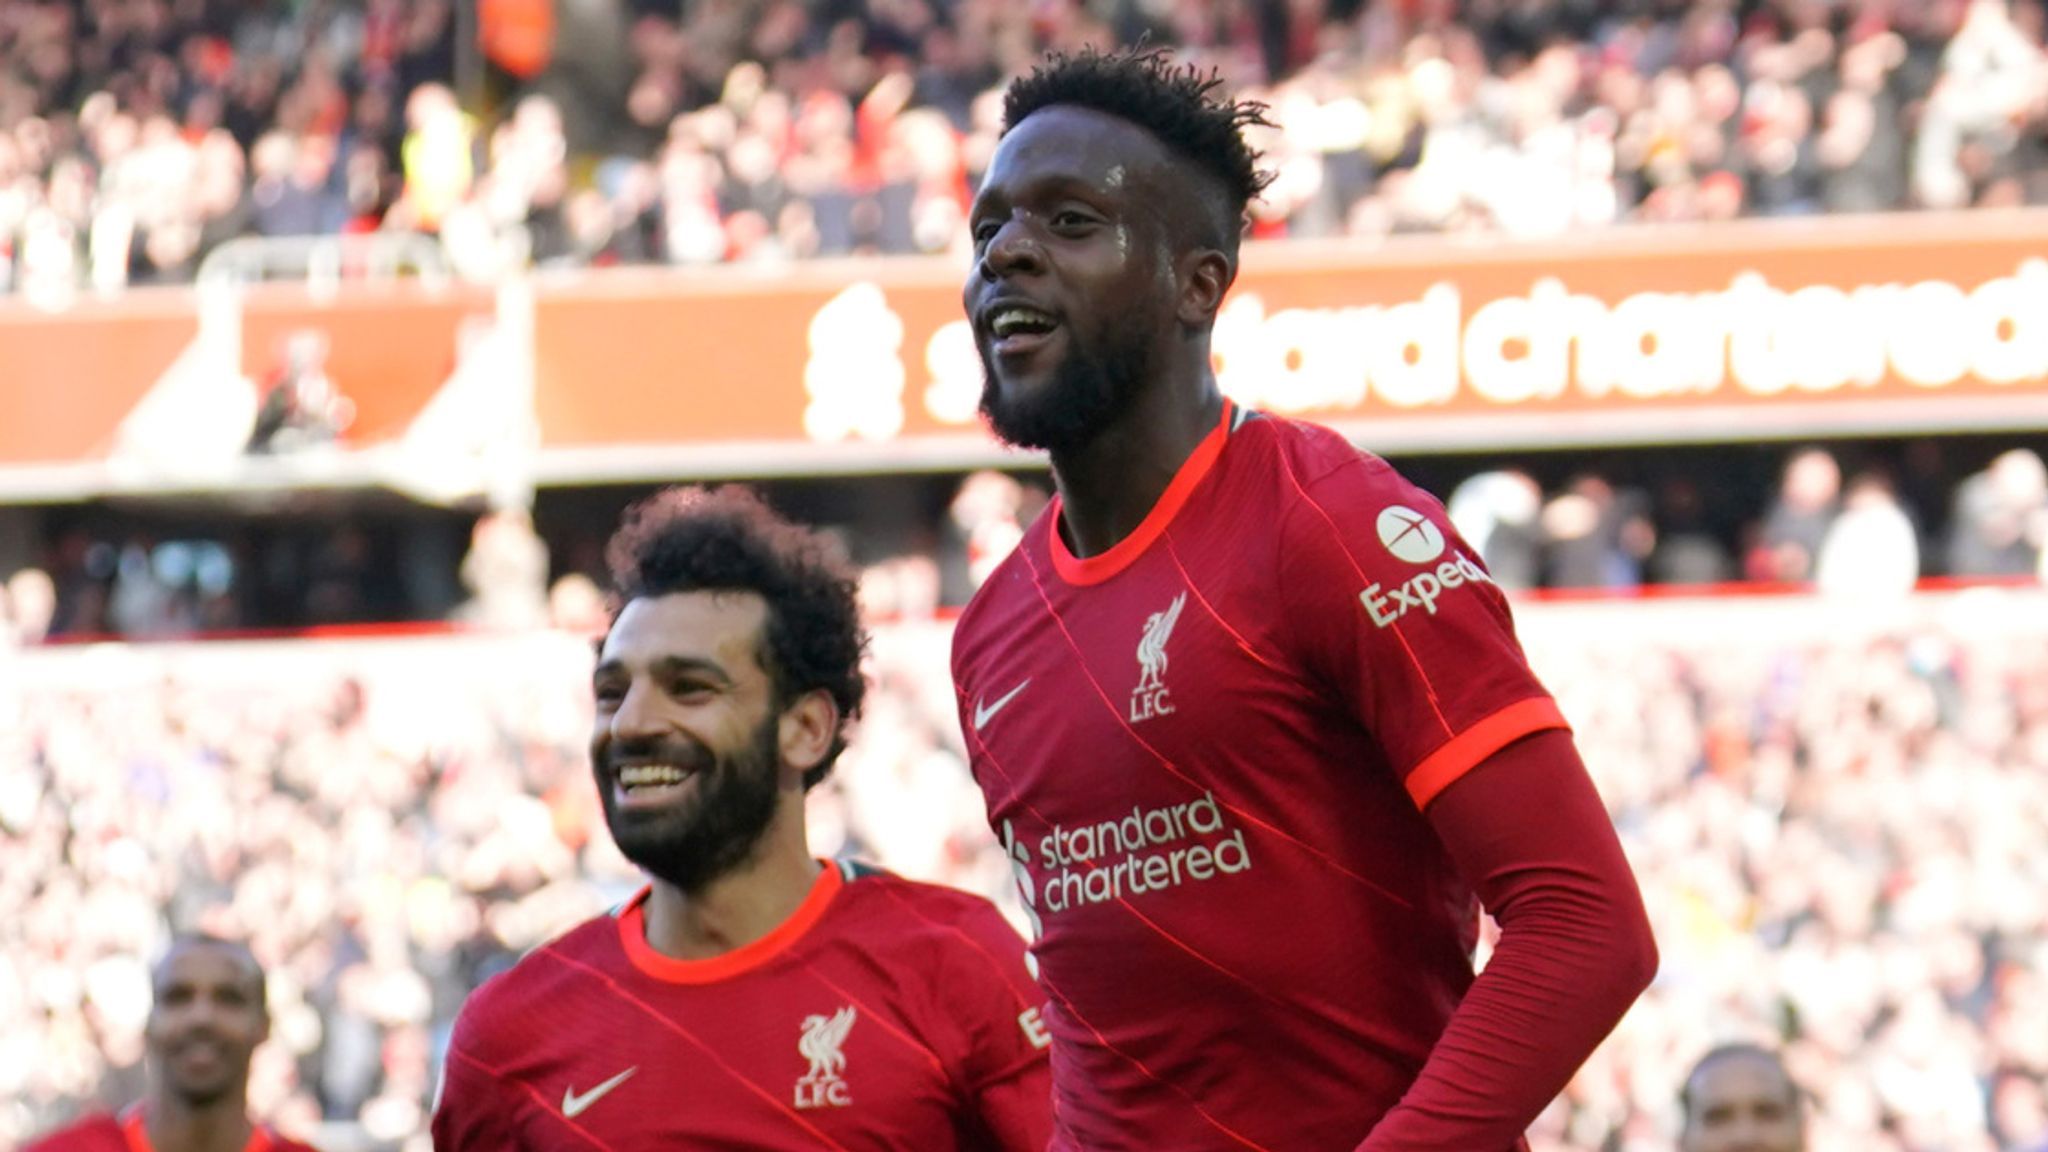 Premier League hits and misses: How Jurgen Klopp changed the Merseyside derby with the help of Divock Origi | Football News | Sky Sports